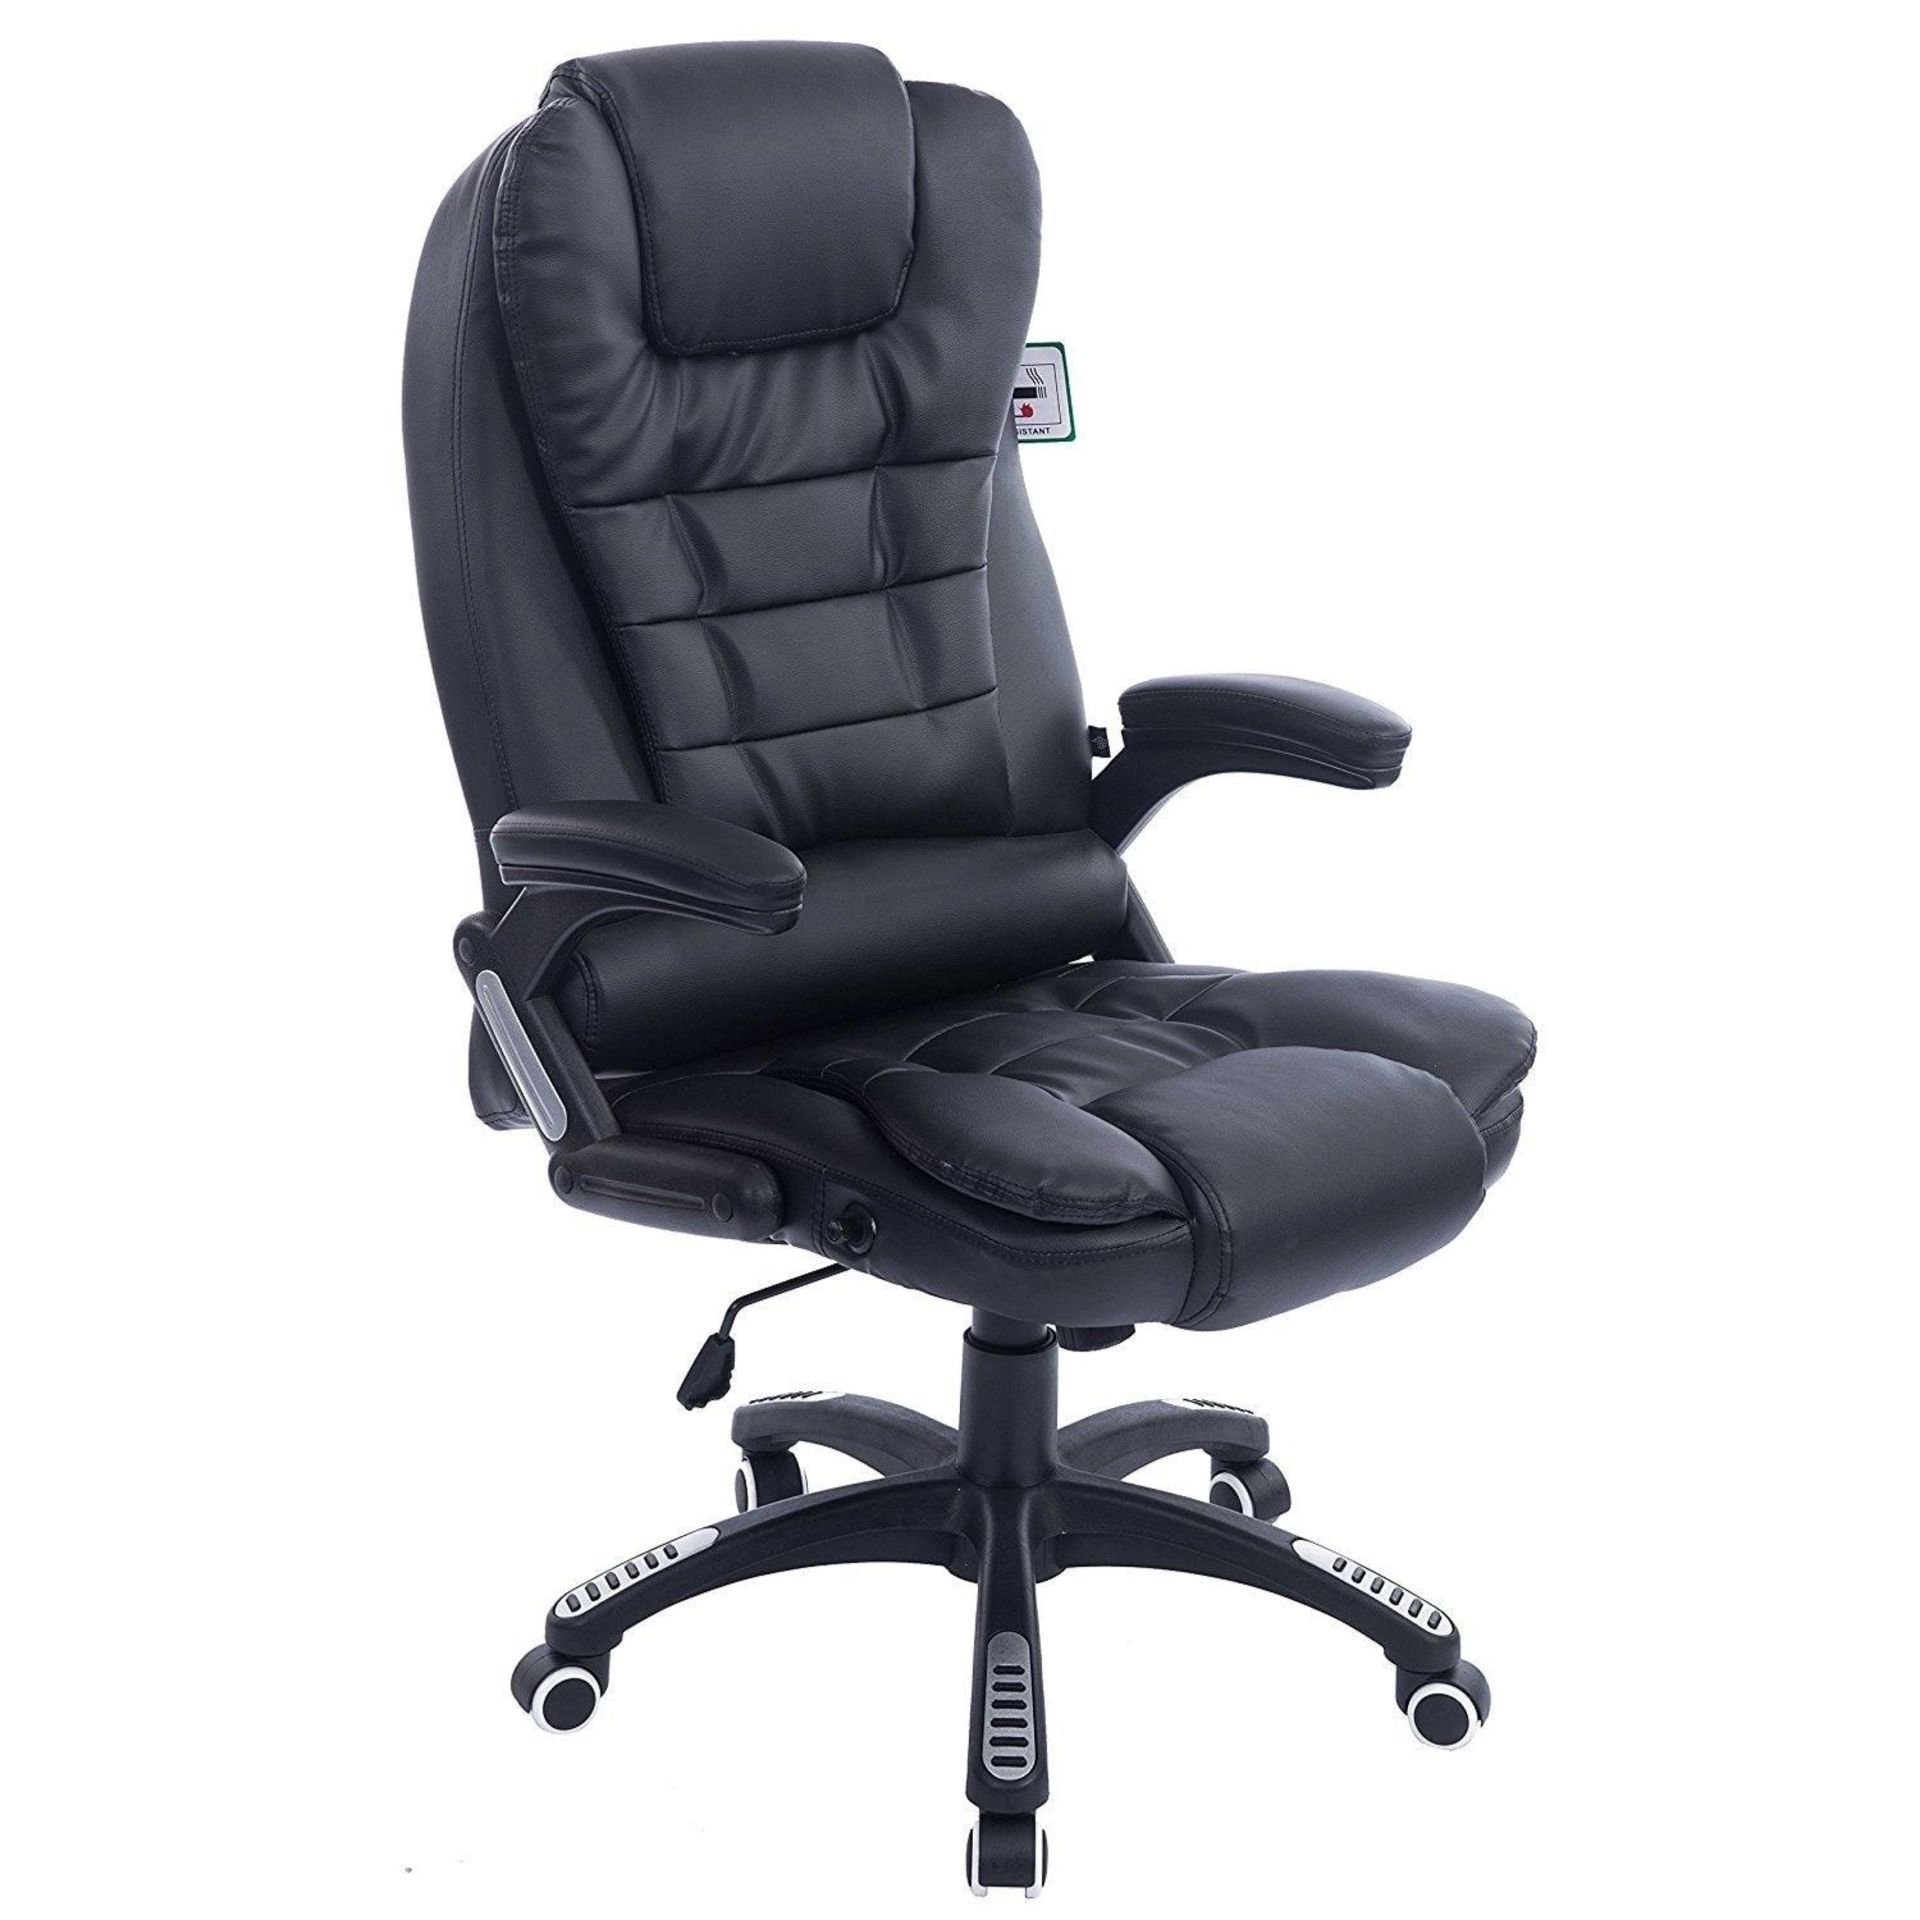 Executive Recline High Back Extra Padded Office Chair, MO17 Black - ER30